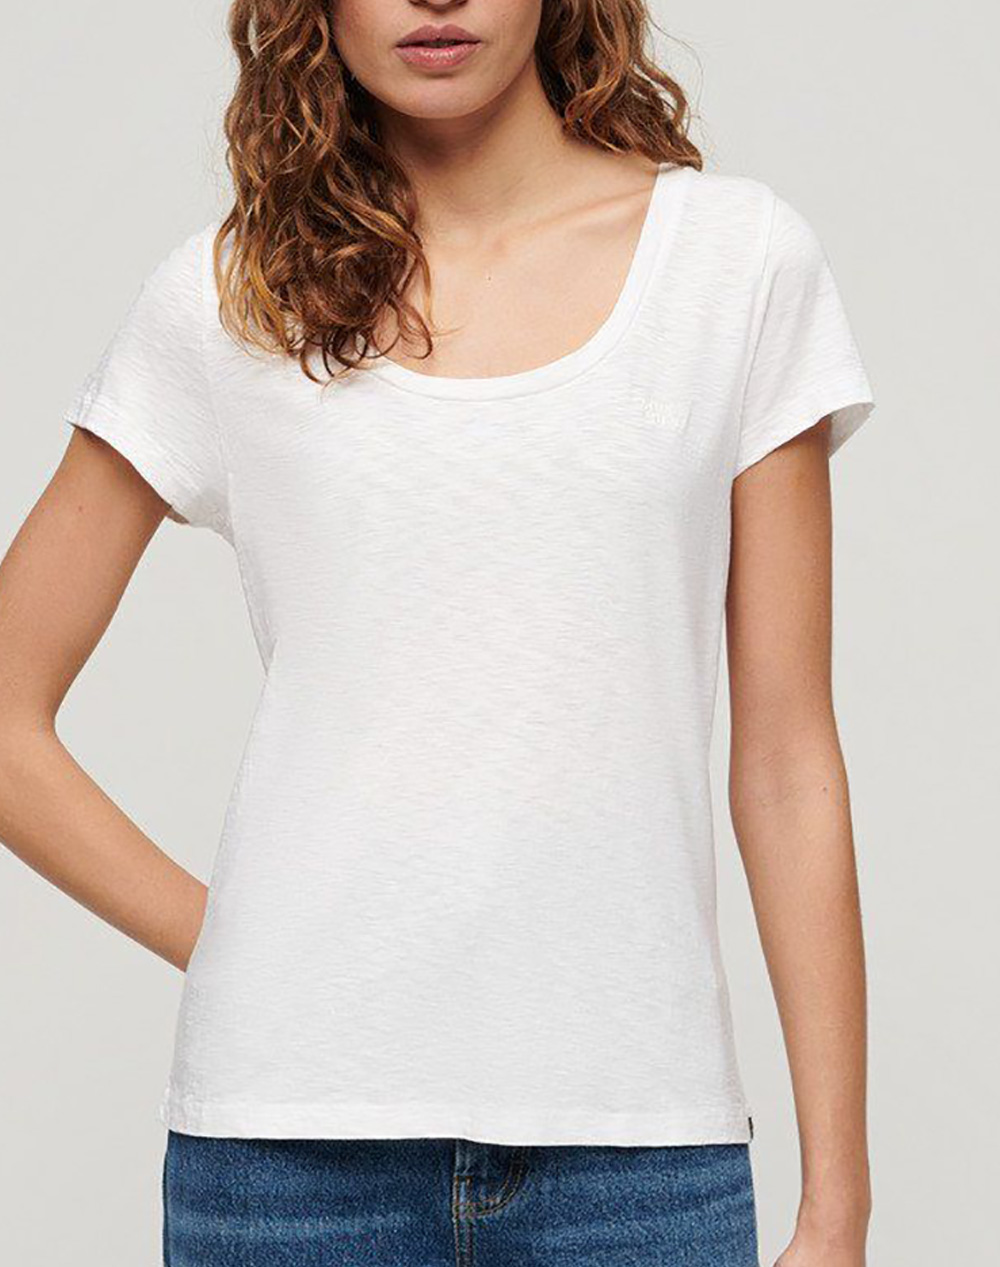 SUPERDRY D2 BOUT SCOOP NECK TEE ΜΠΛΟΥΖΑ ΓΥΝΑΙΚΕΙΟ W1011381A-01C White 3810ASUPE3400229_1929